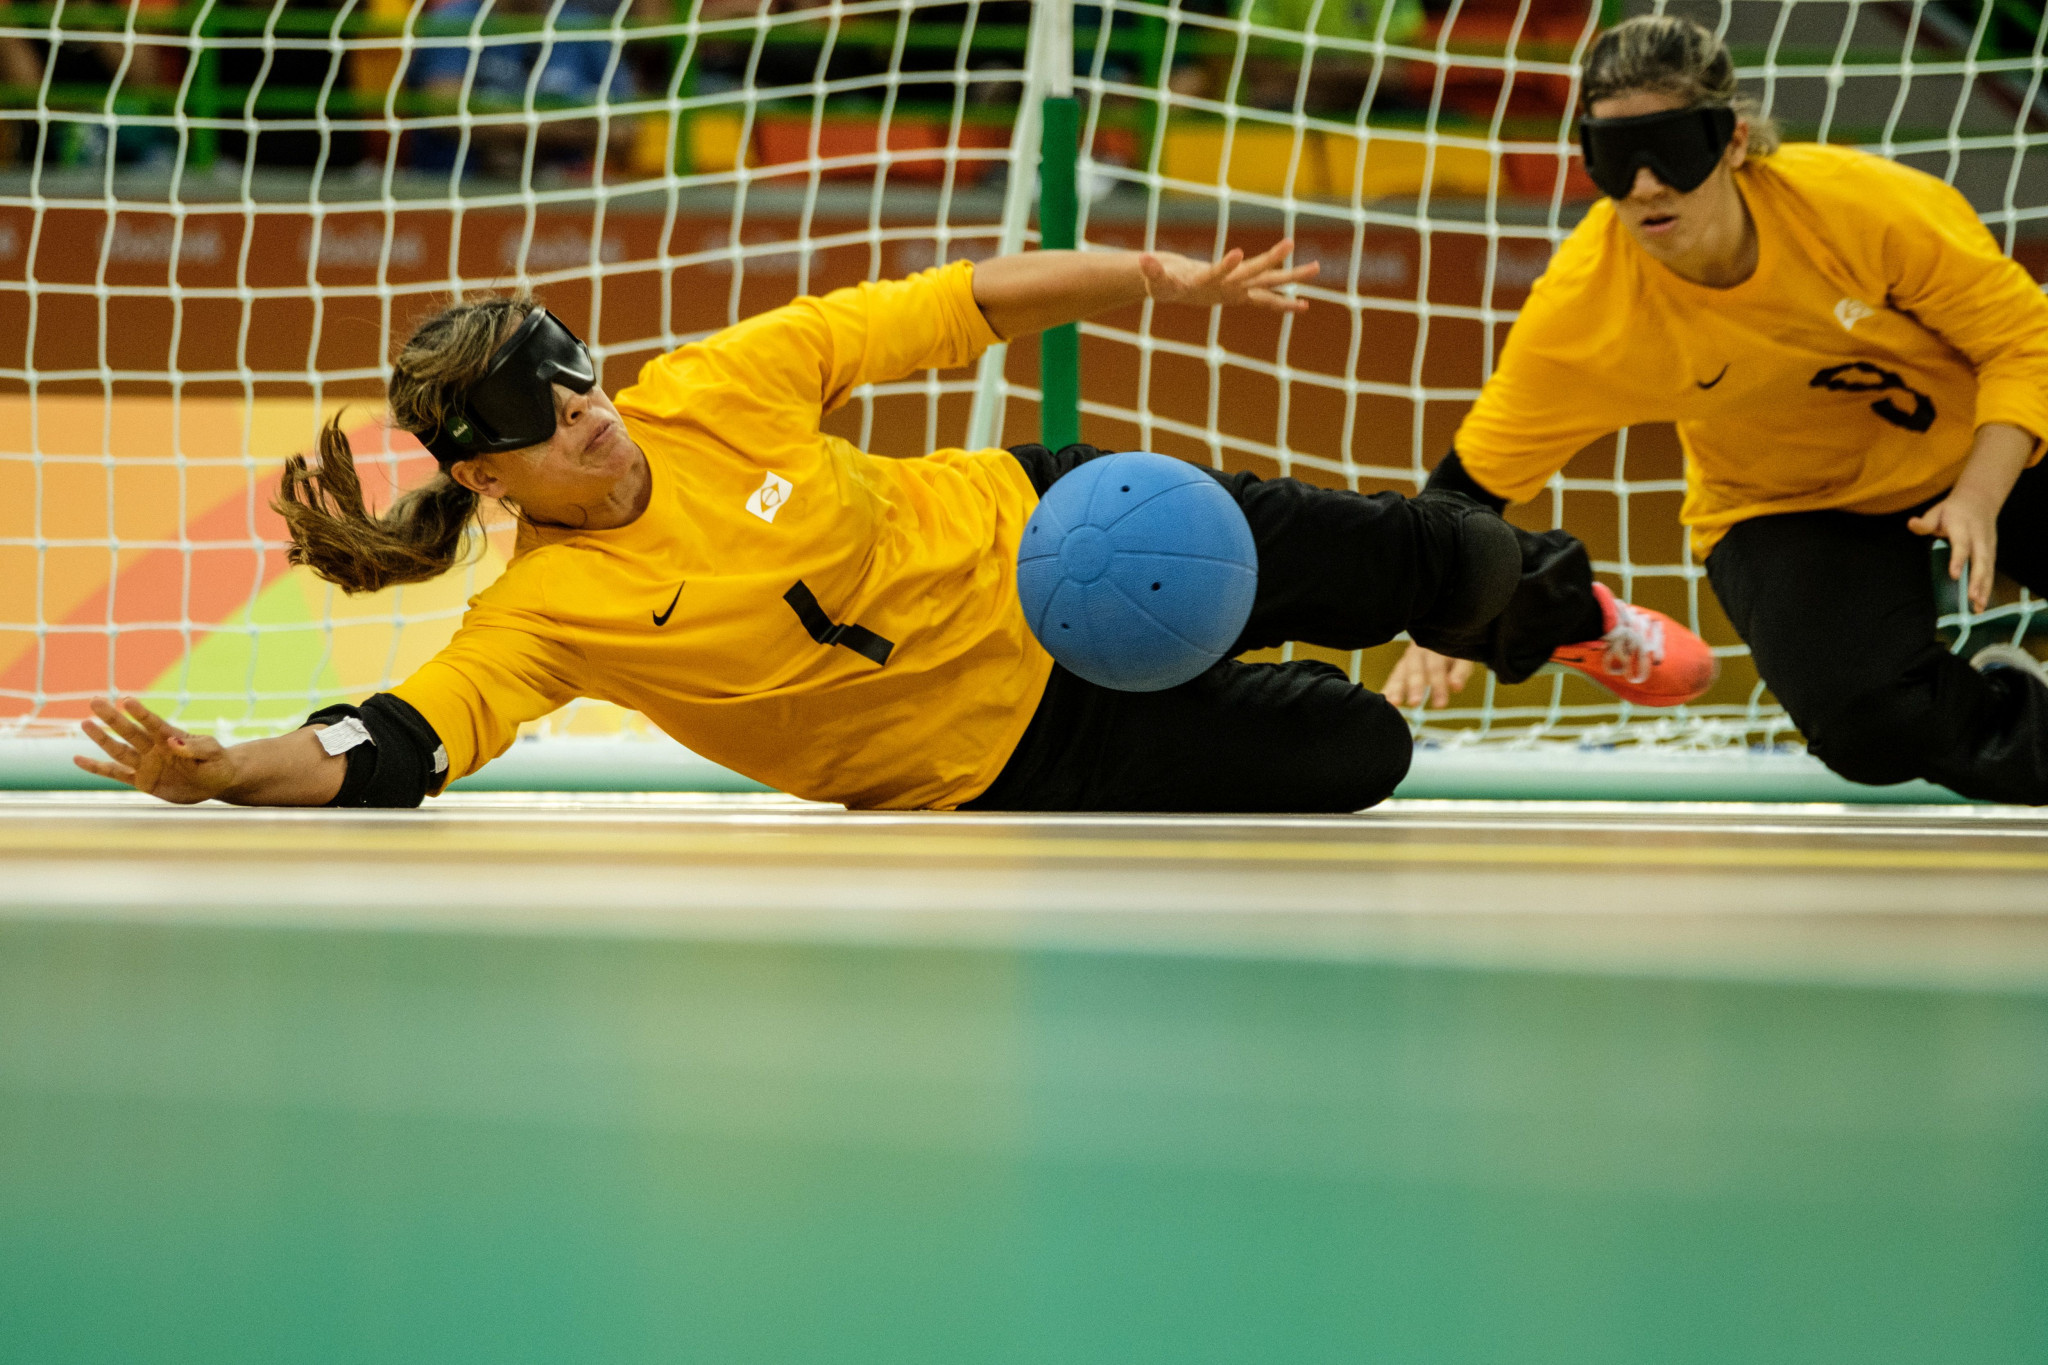 Tokyo 2020 goalball draw to be conducted on Monday